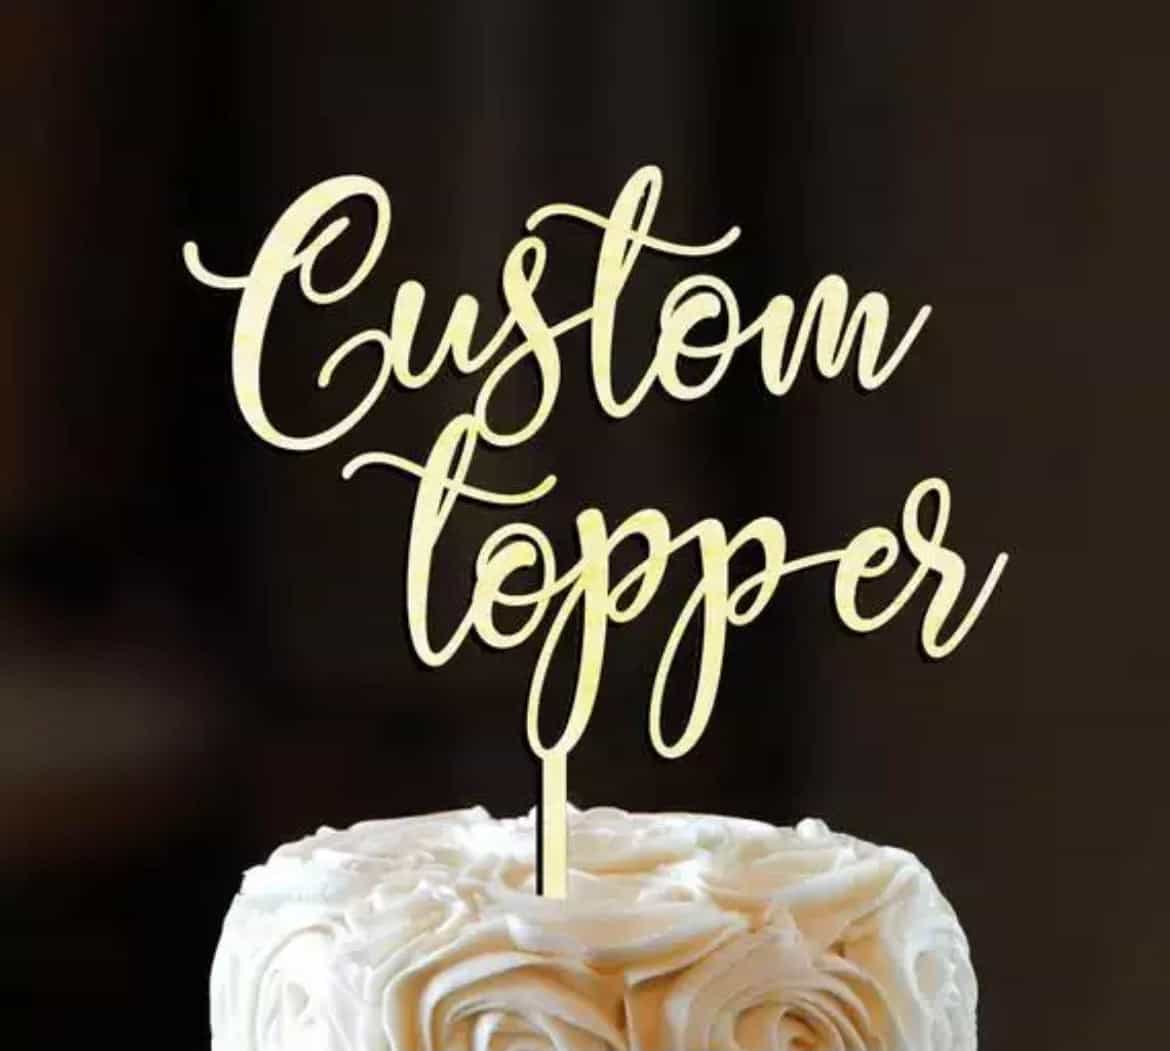 Personalised Decorative Name Cake Topper